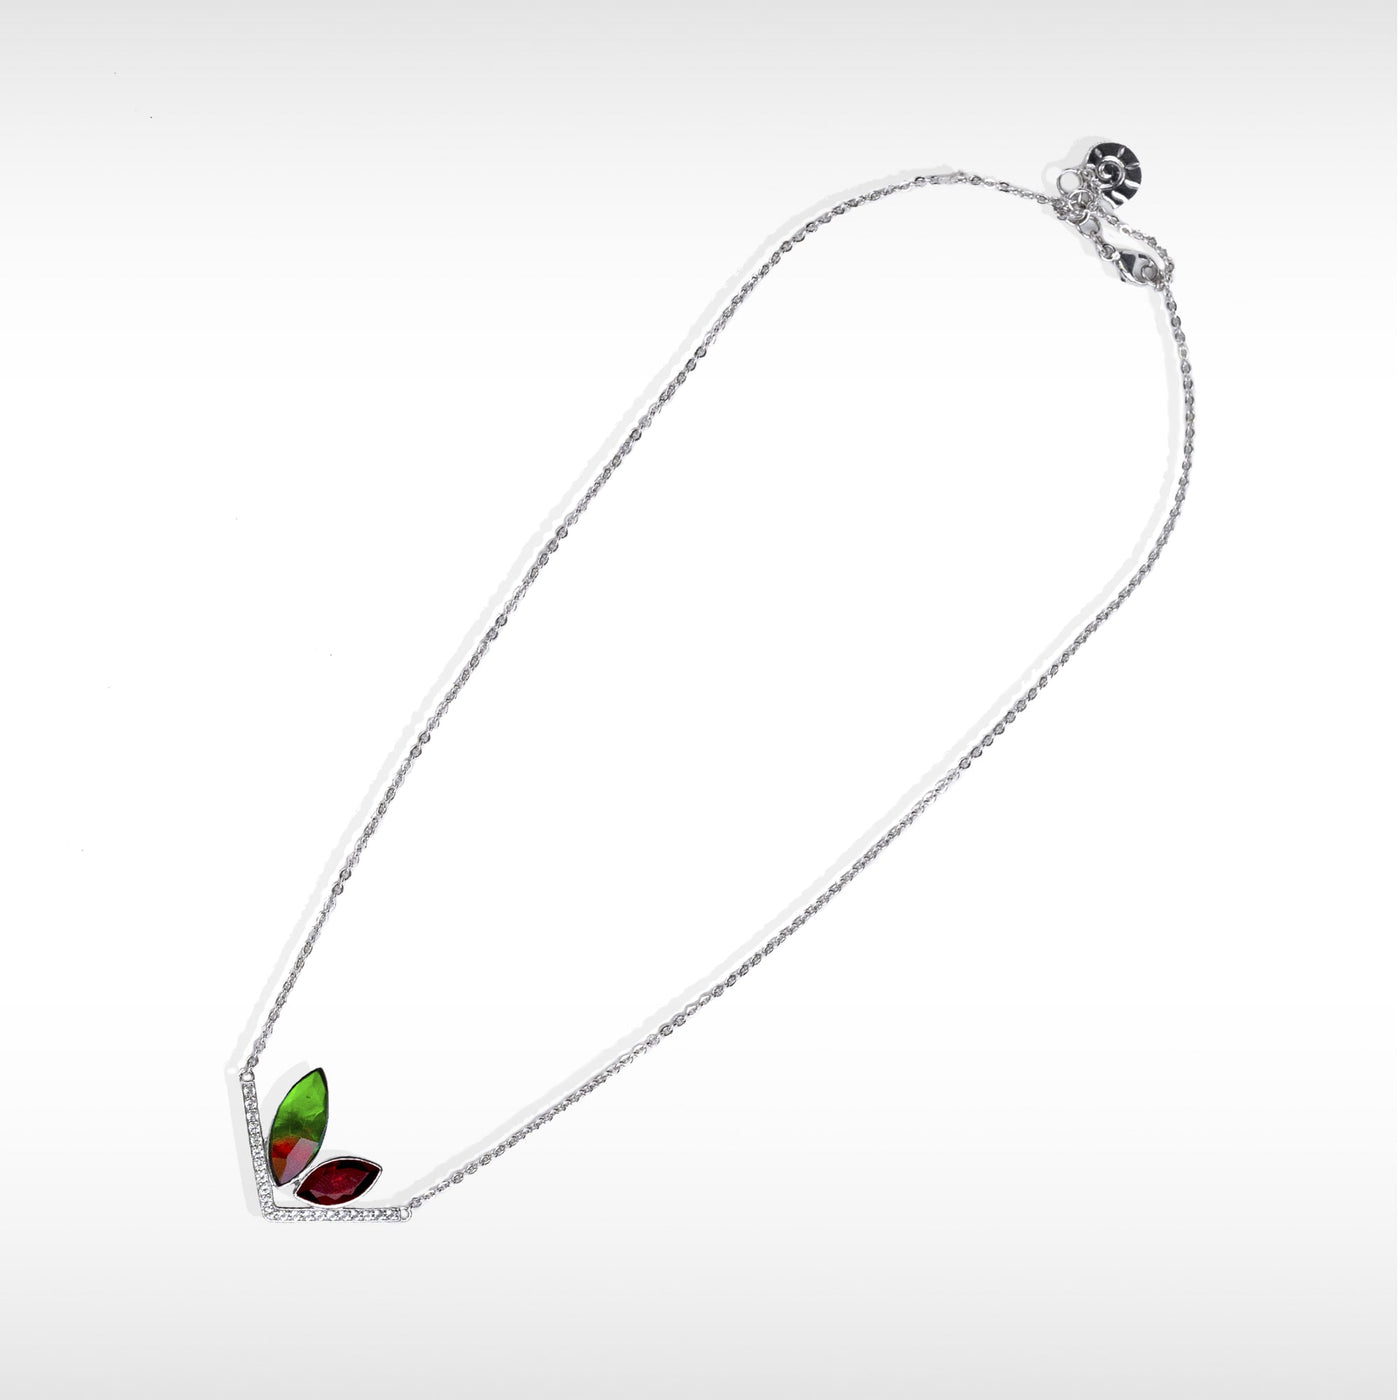 Rabbit Ammolite Necklace in Sterling Silver